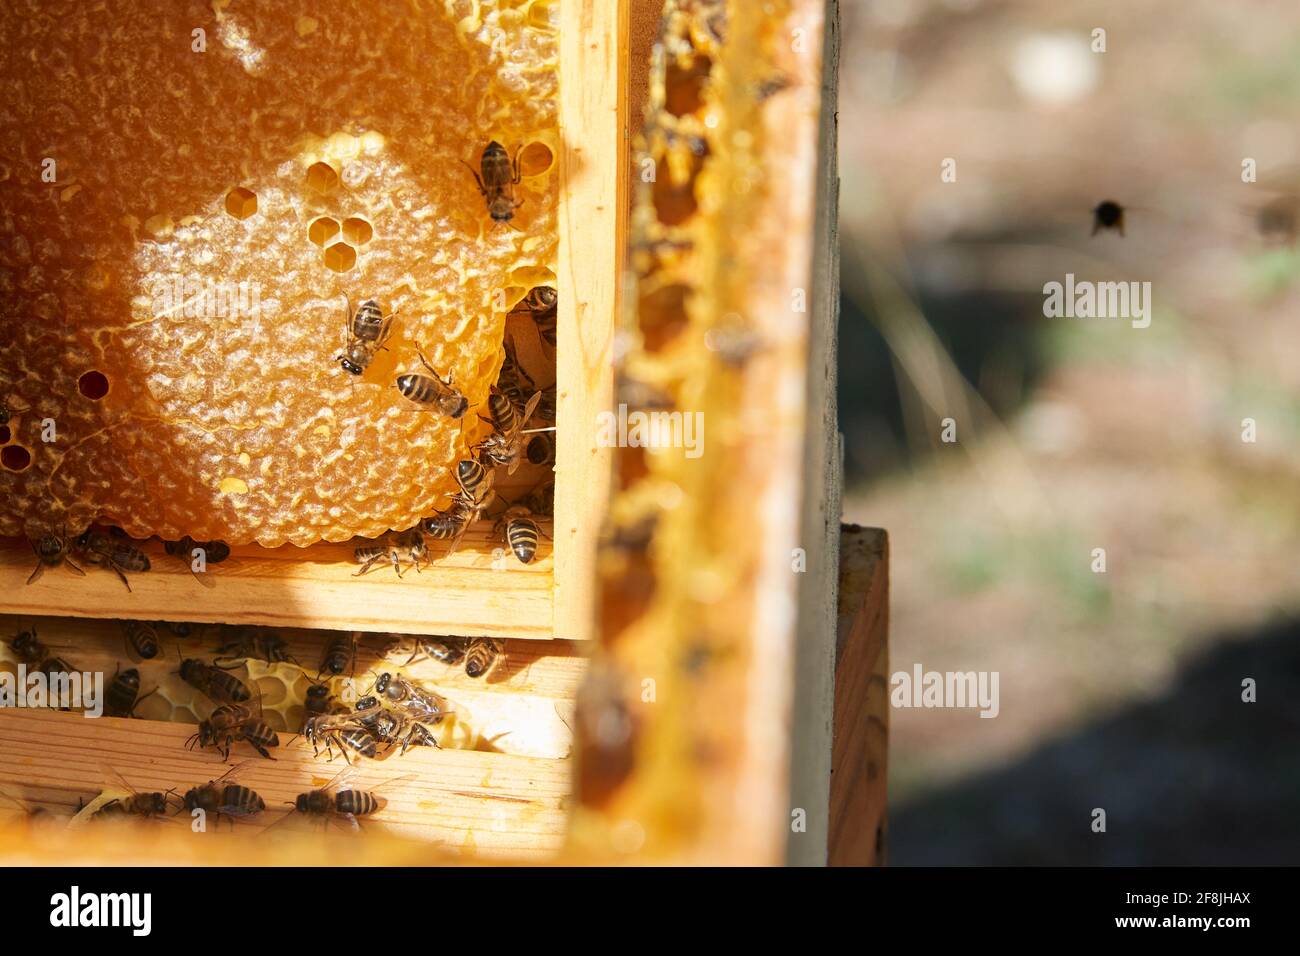 Some bees working in your comb while one alone bee fly around it Stock Photo